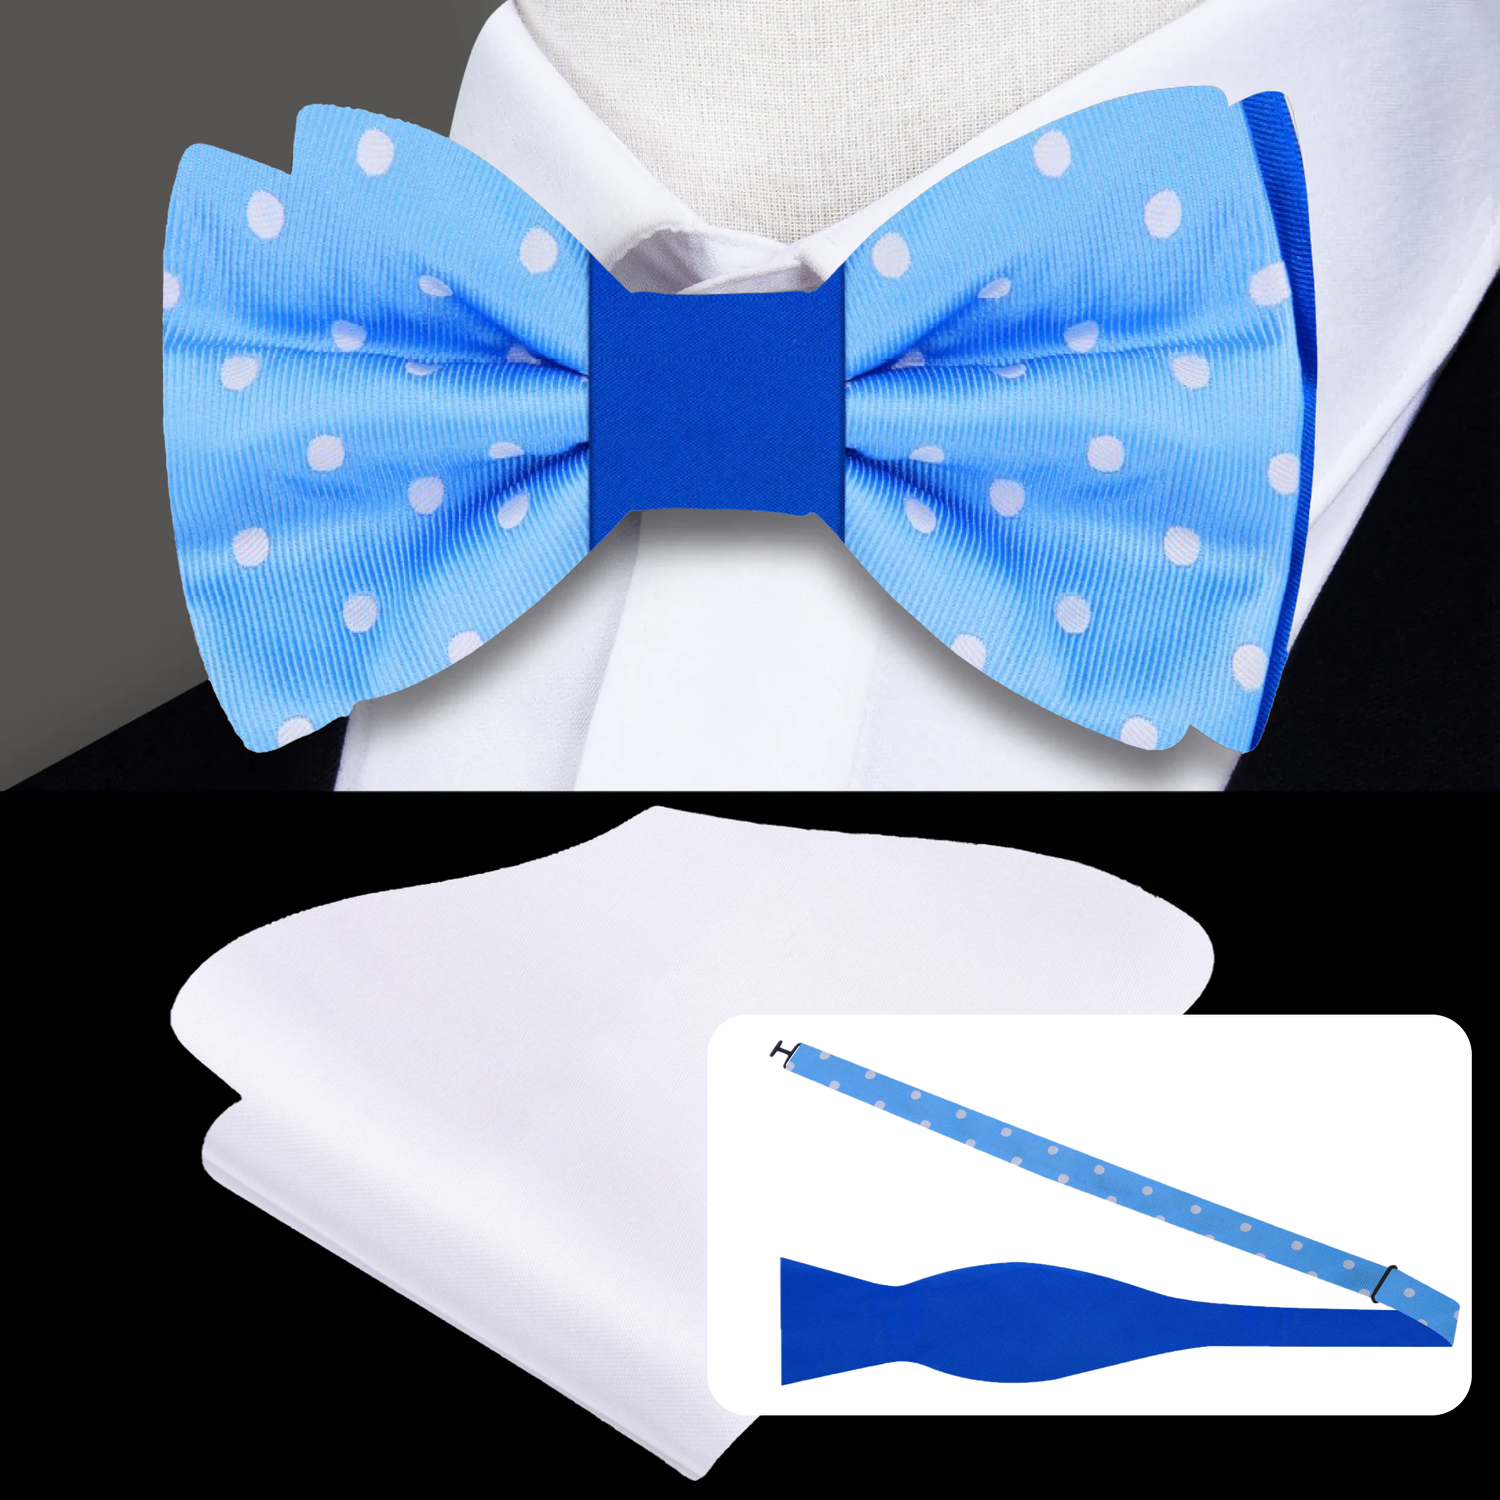 Shades of Blue Polka, White Polka/Solid Bow Tie and Solid White Pocket Square